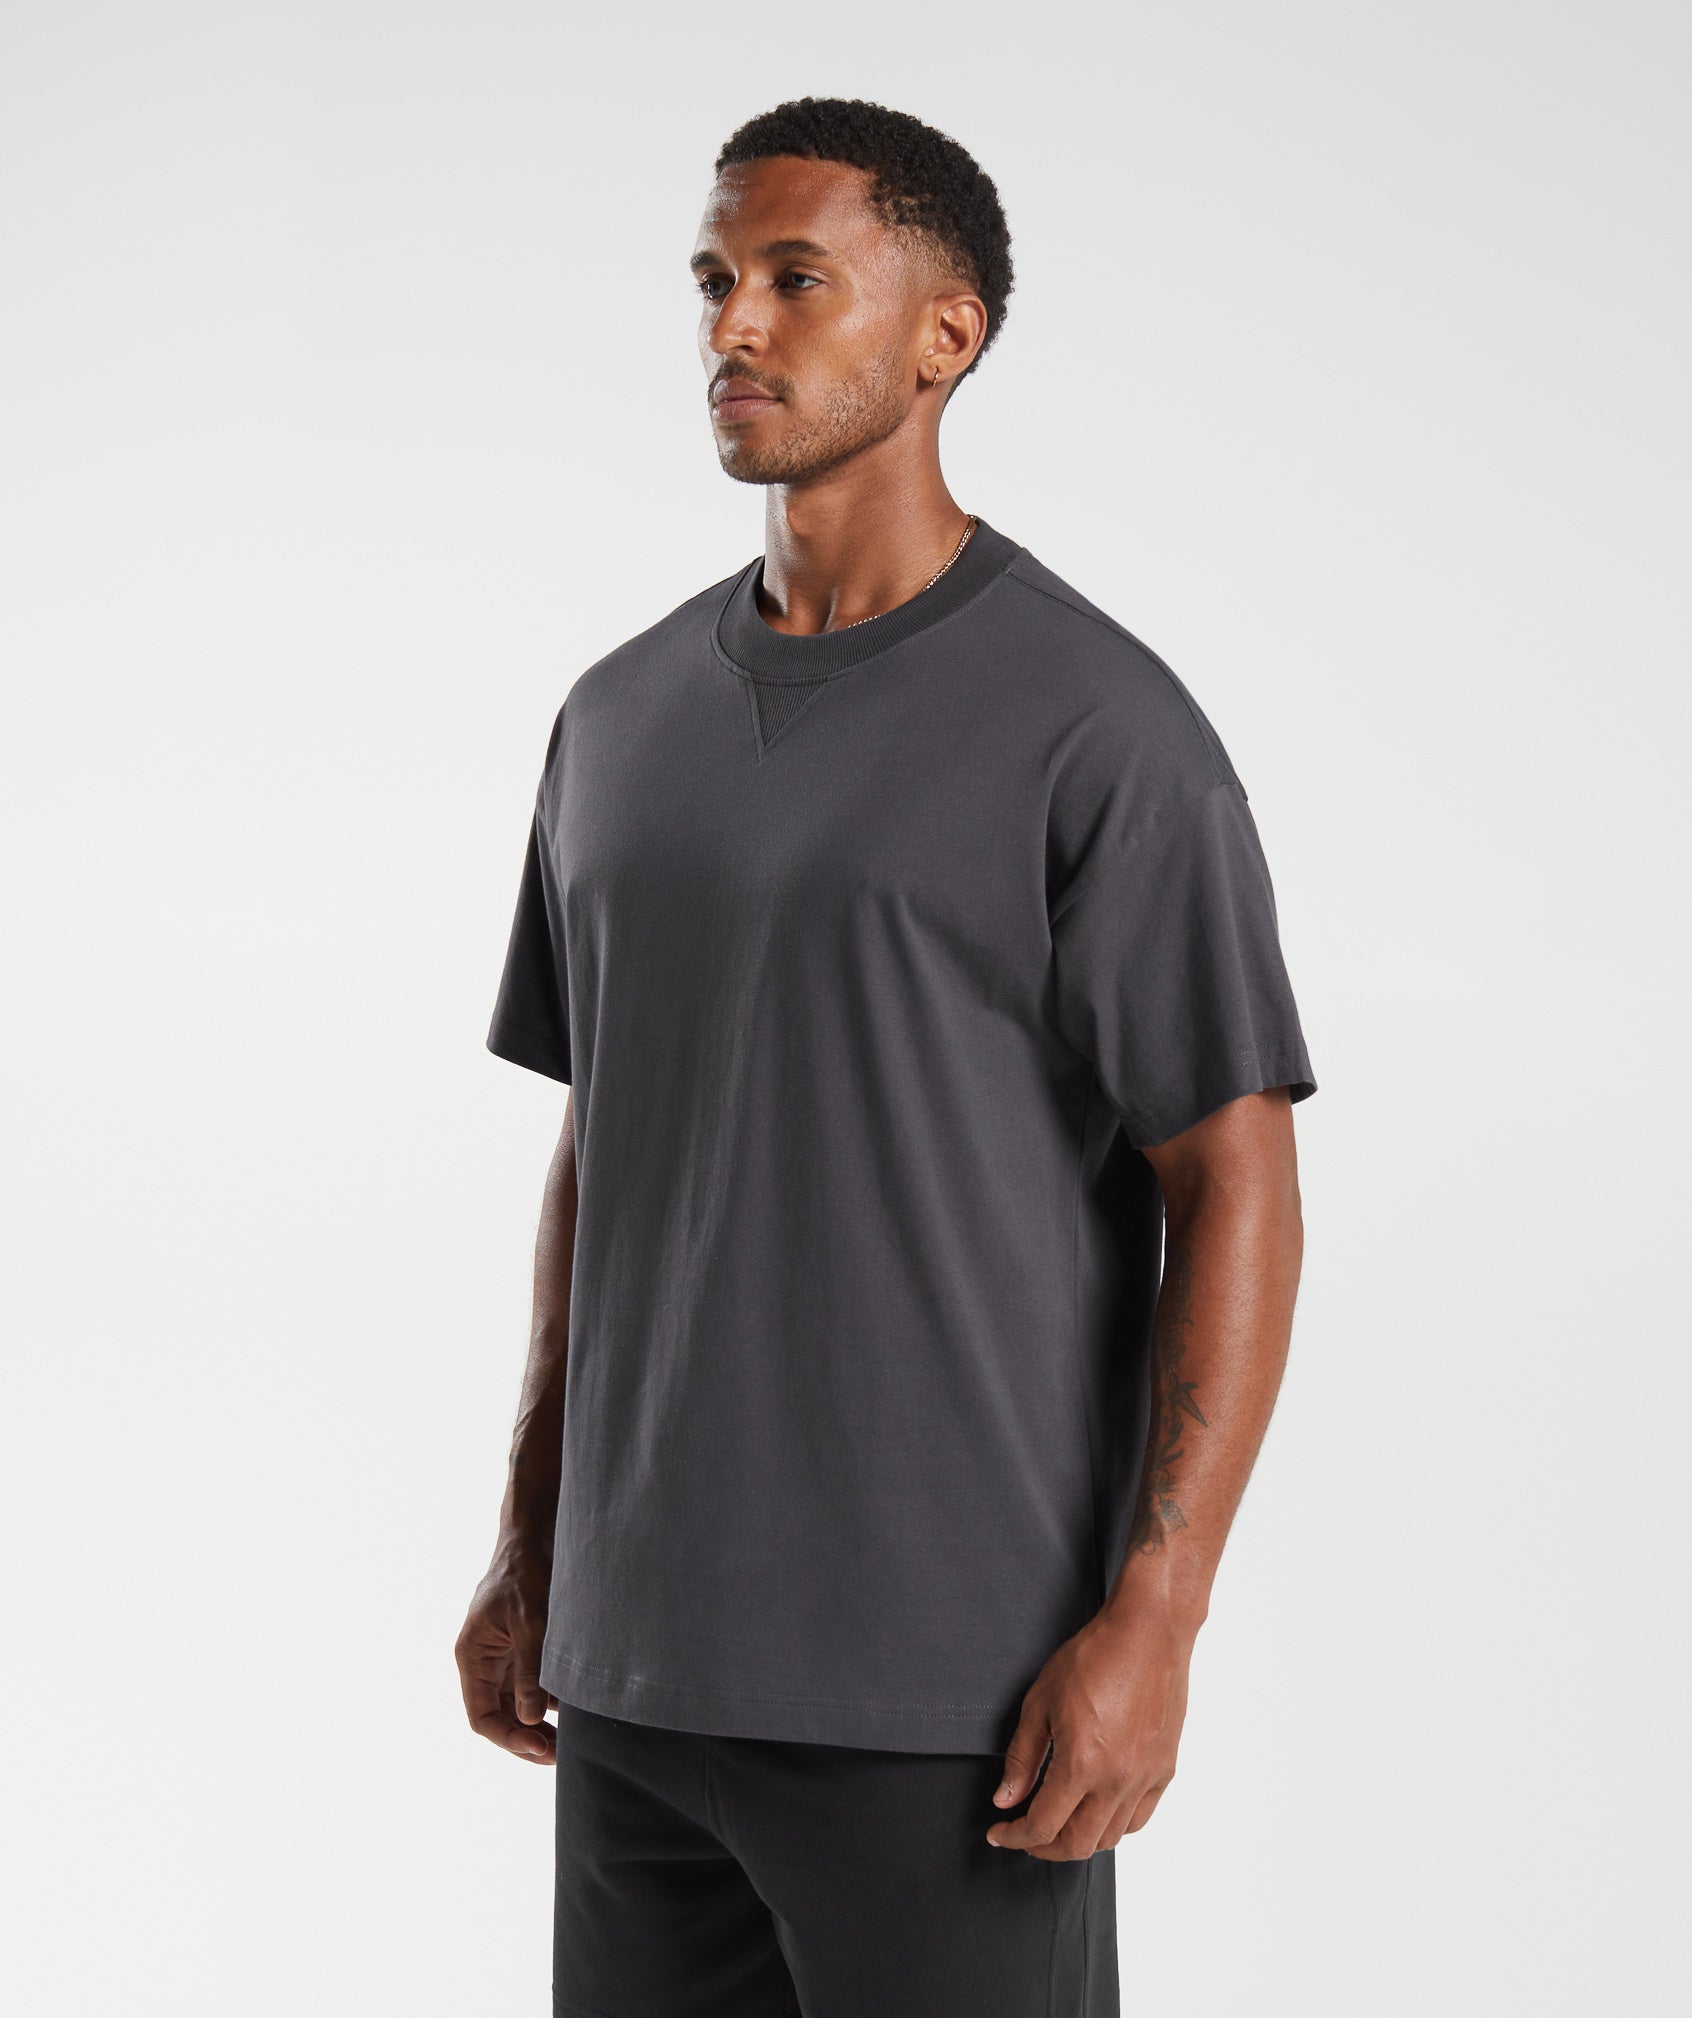 Rest Day Essentials T-Shirt in Onyx Grey - view 3